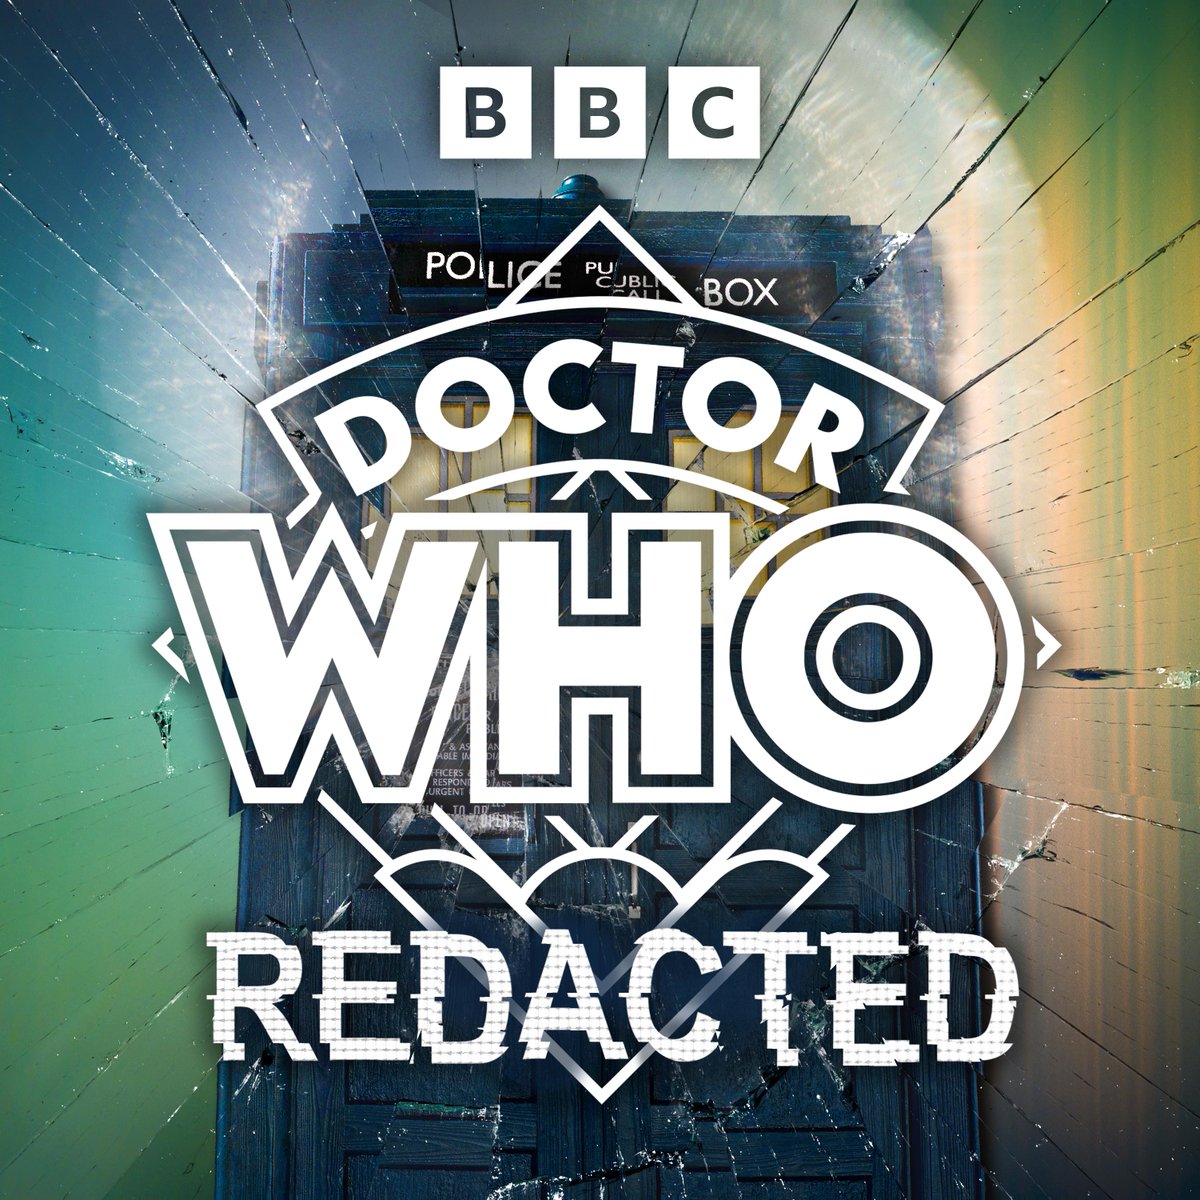 Redacted returns! Charlie Craggs, Freddy Carter and a who's who of Who star in the second series of podcast #DoctorWho: Redacted, debuting on @BBCSounds on 18th September 🥳🎧